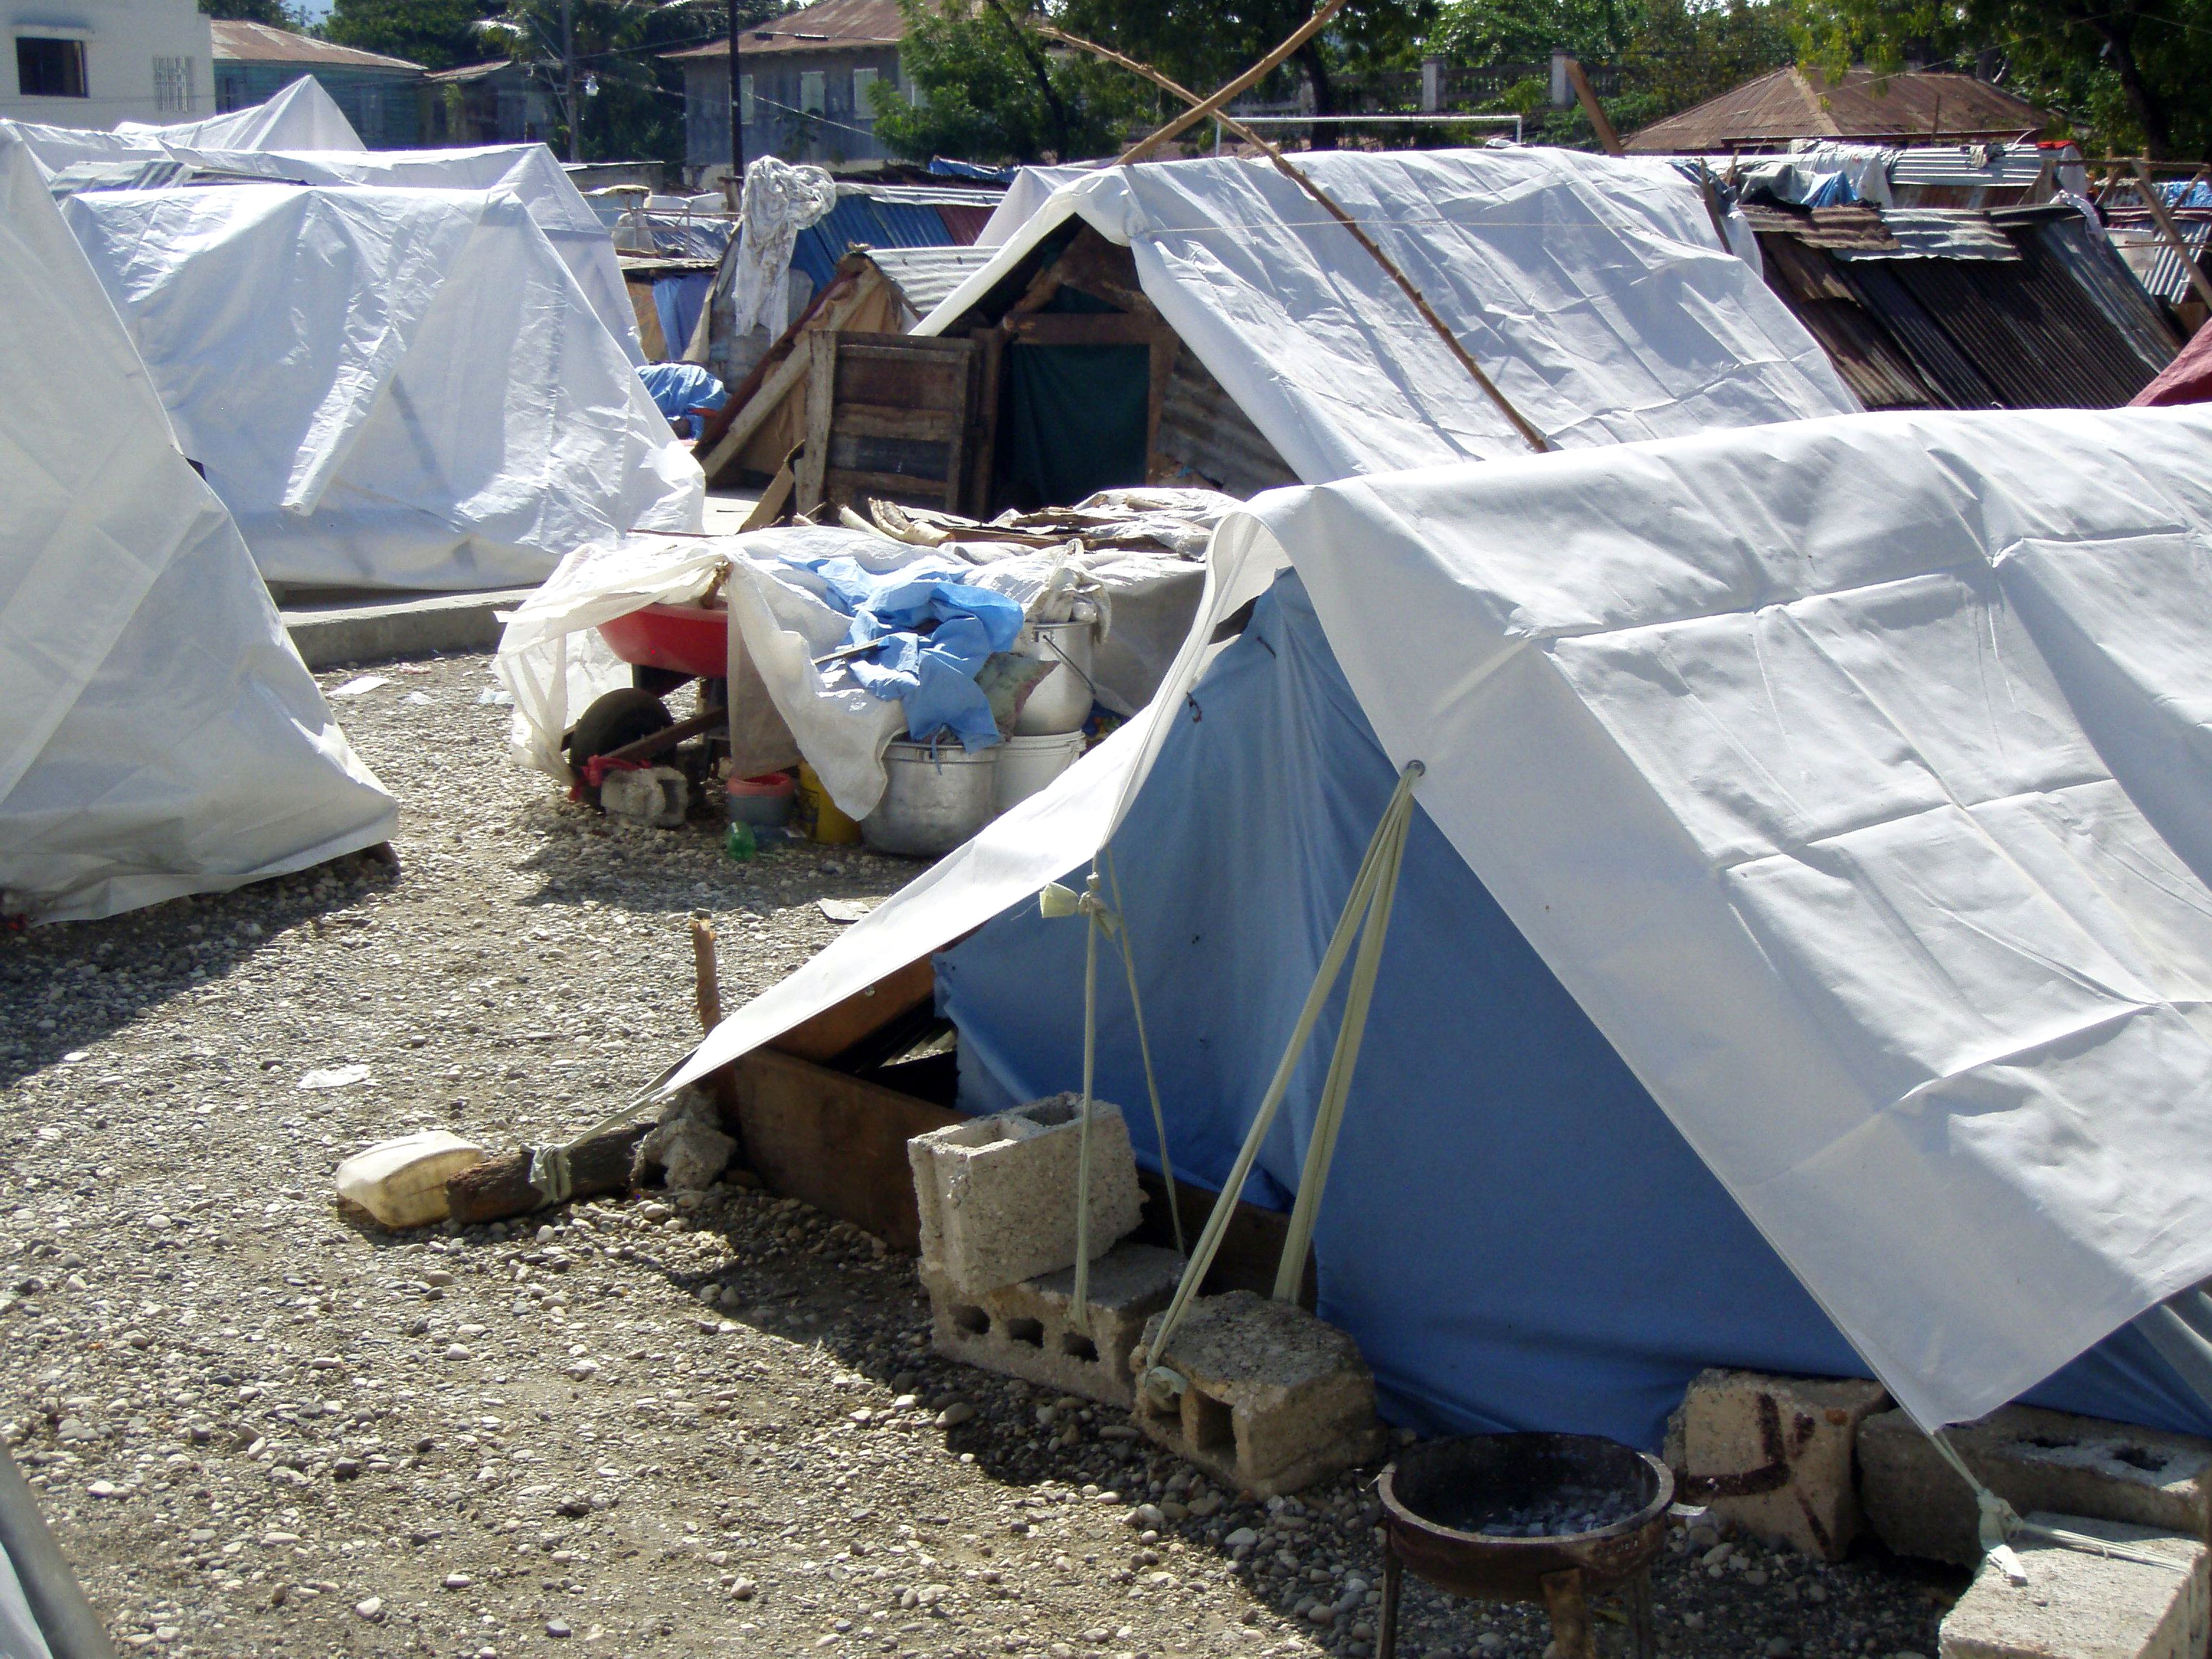 Free picture: makeshift, housing, facilities, earthquake4608 x 3456